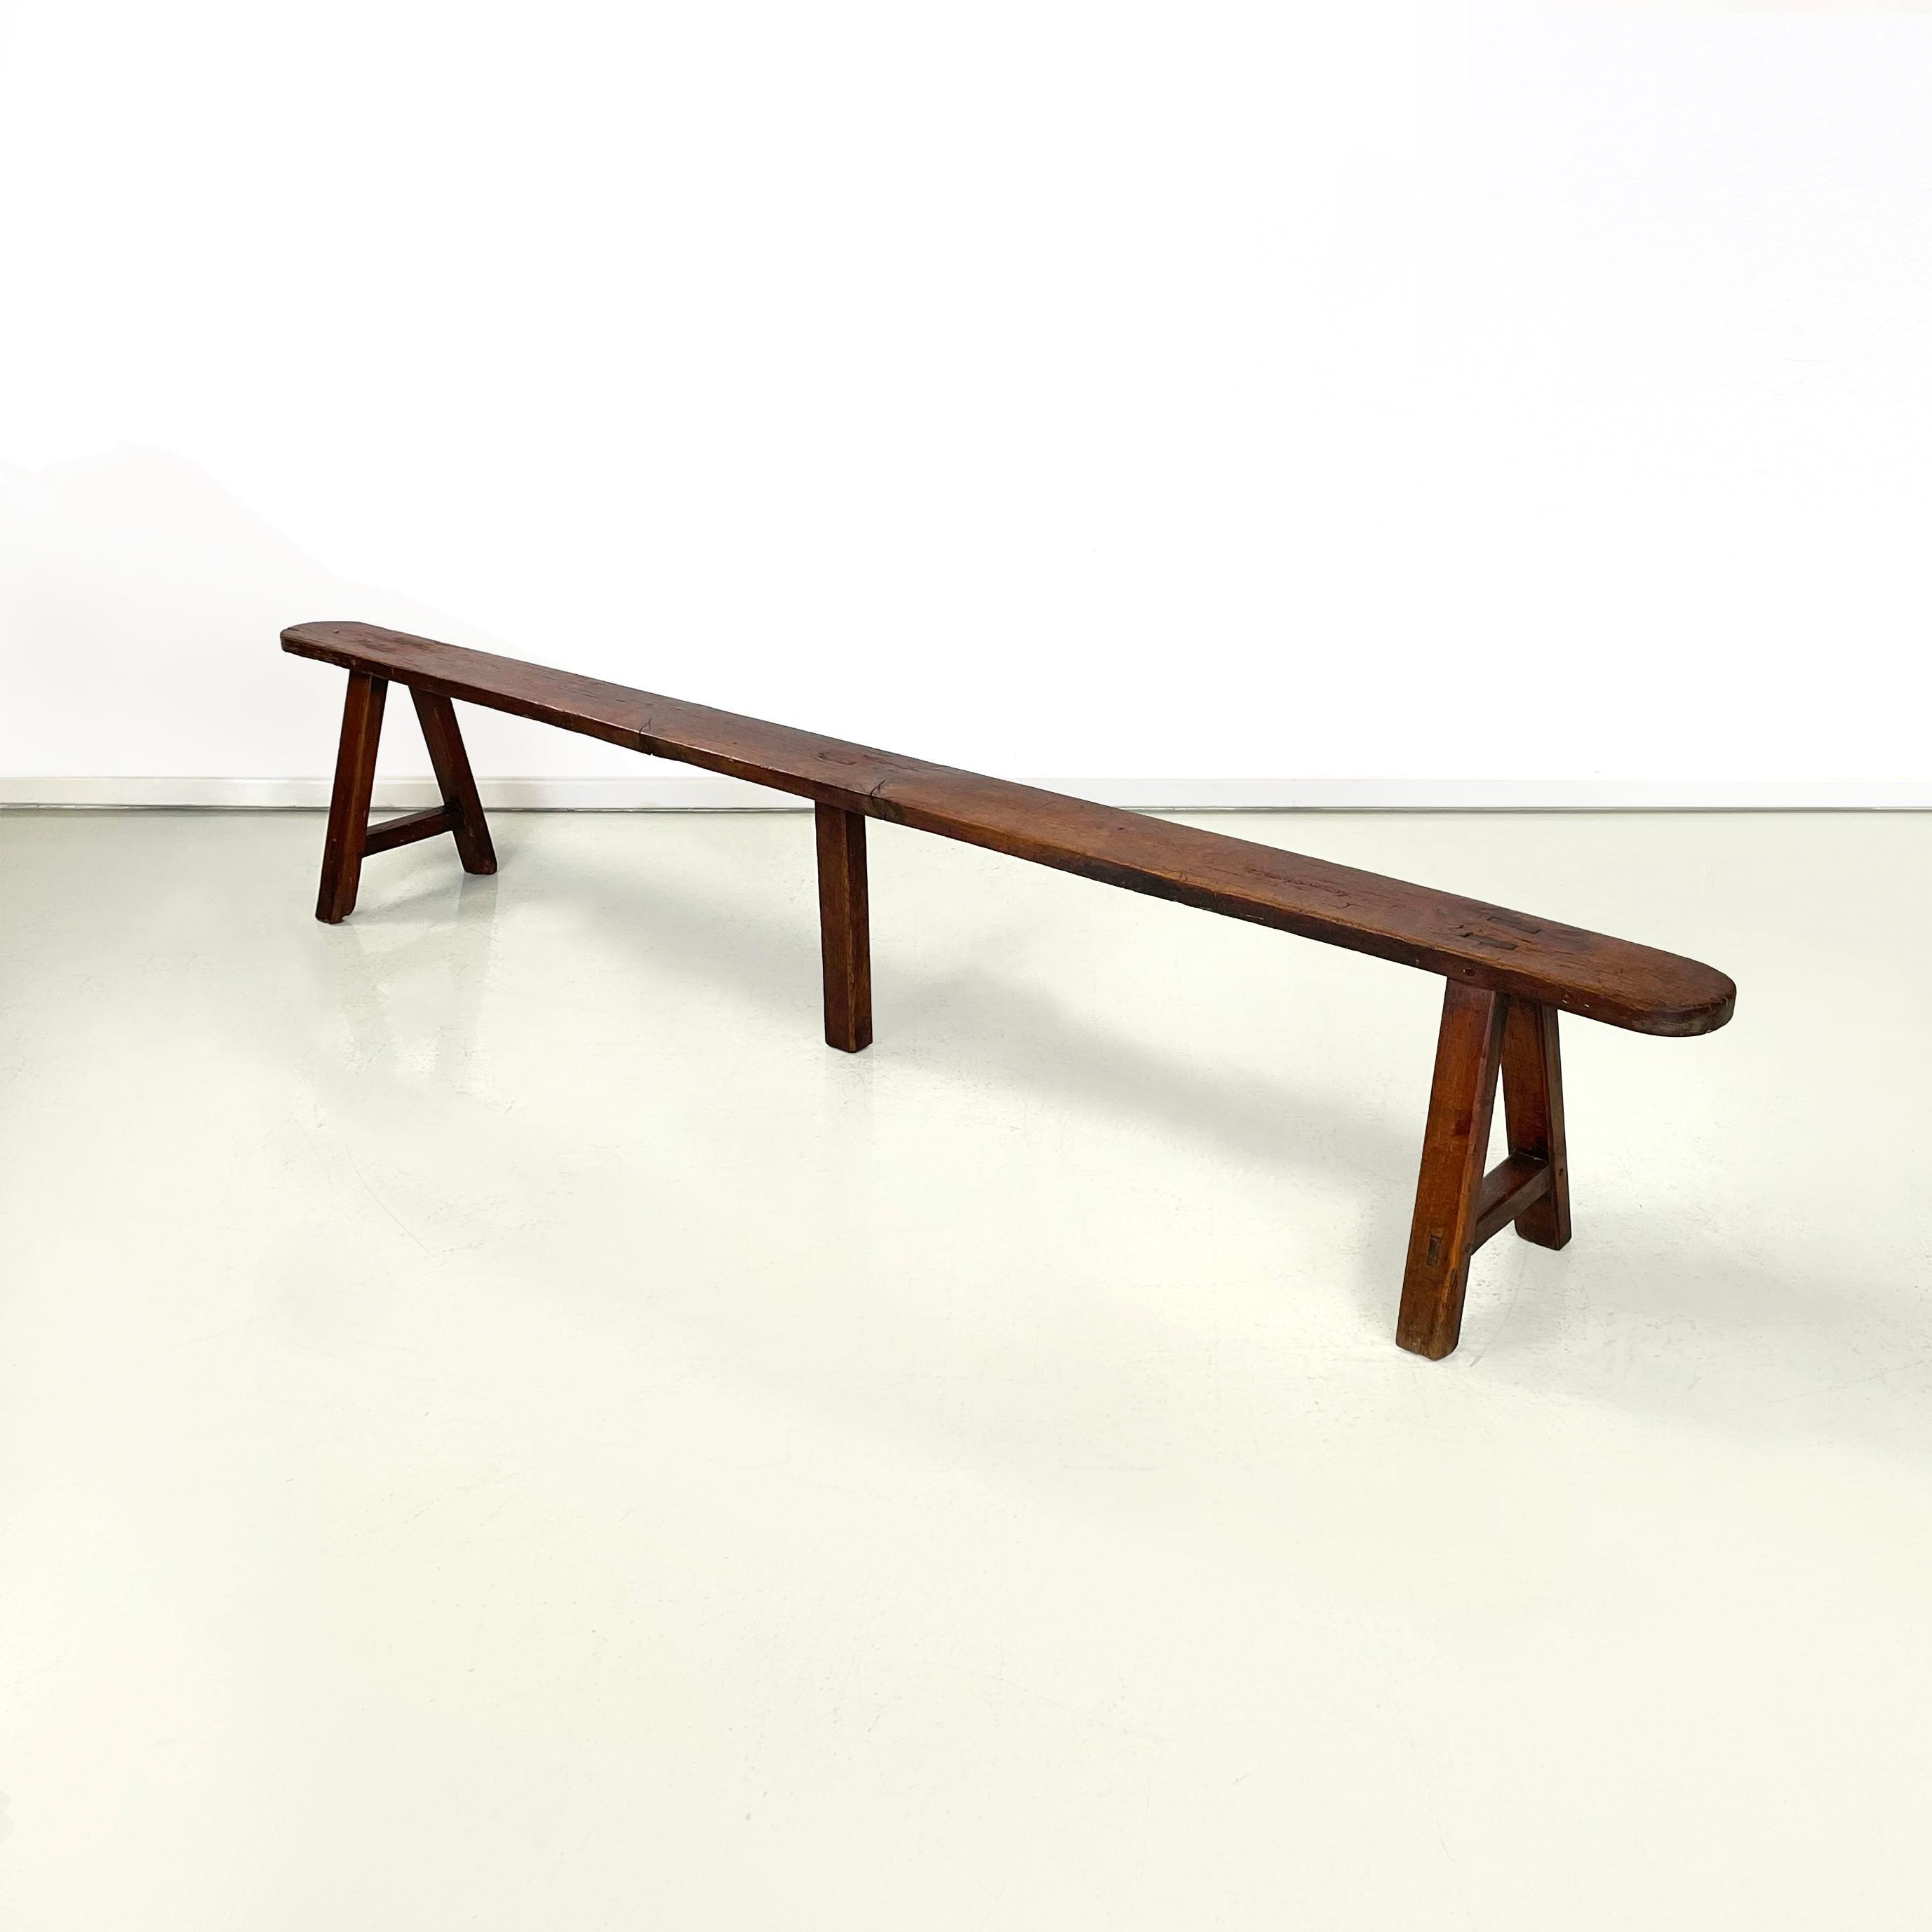 French mid-century Wooden benches with narrow and long seat, 1930s
Pair of benches with narrow and long seat with rounded corners, entirely in solid wood. The legs with a square section facing outwards are positioned diagonally joined by a strip,